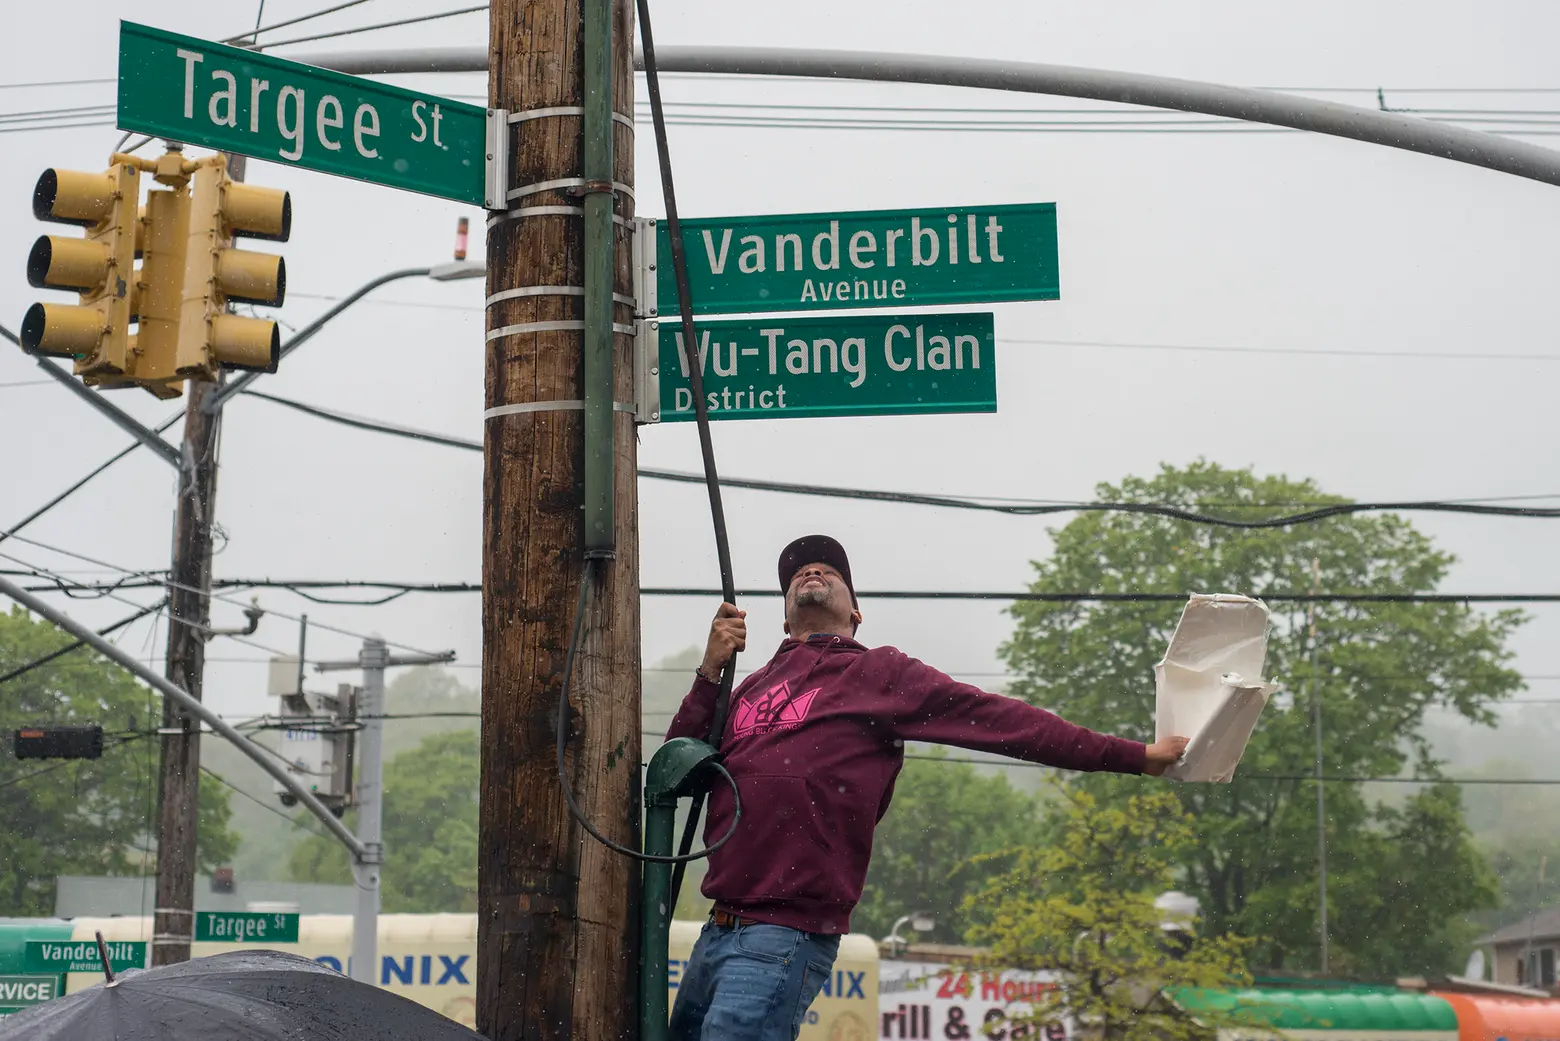 Staten Island intersection is renamed to honor legacy of the Wu-Tang Clan